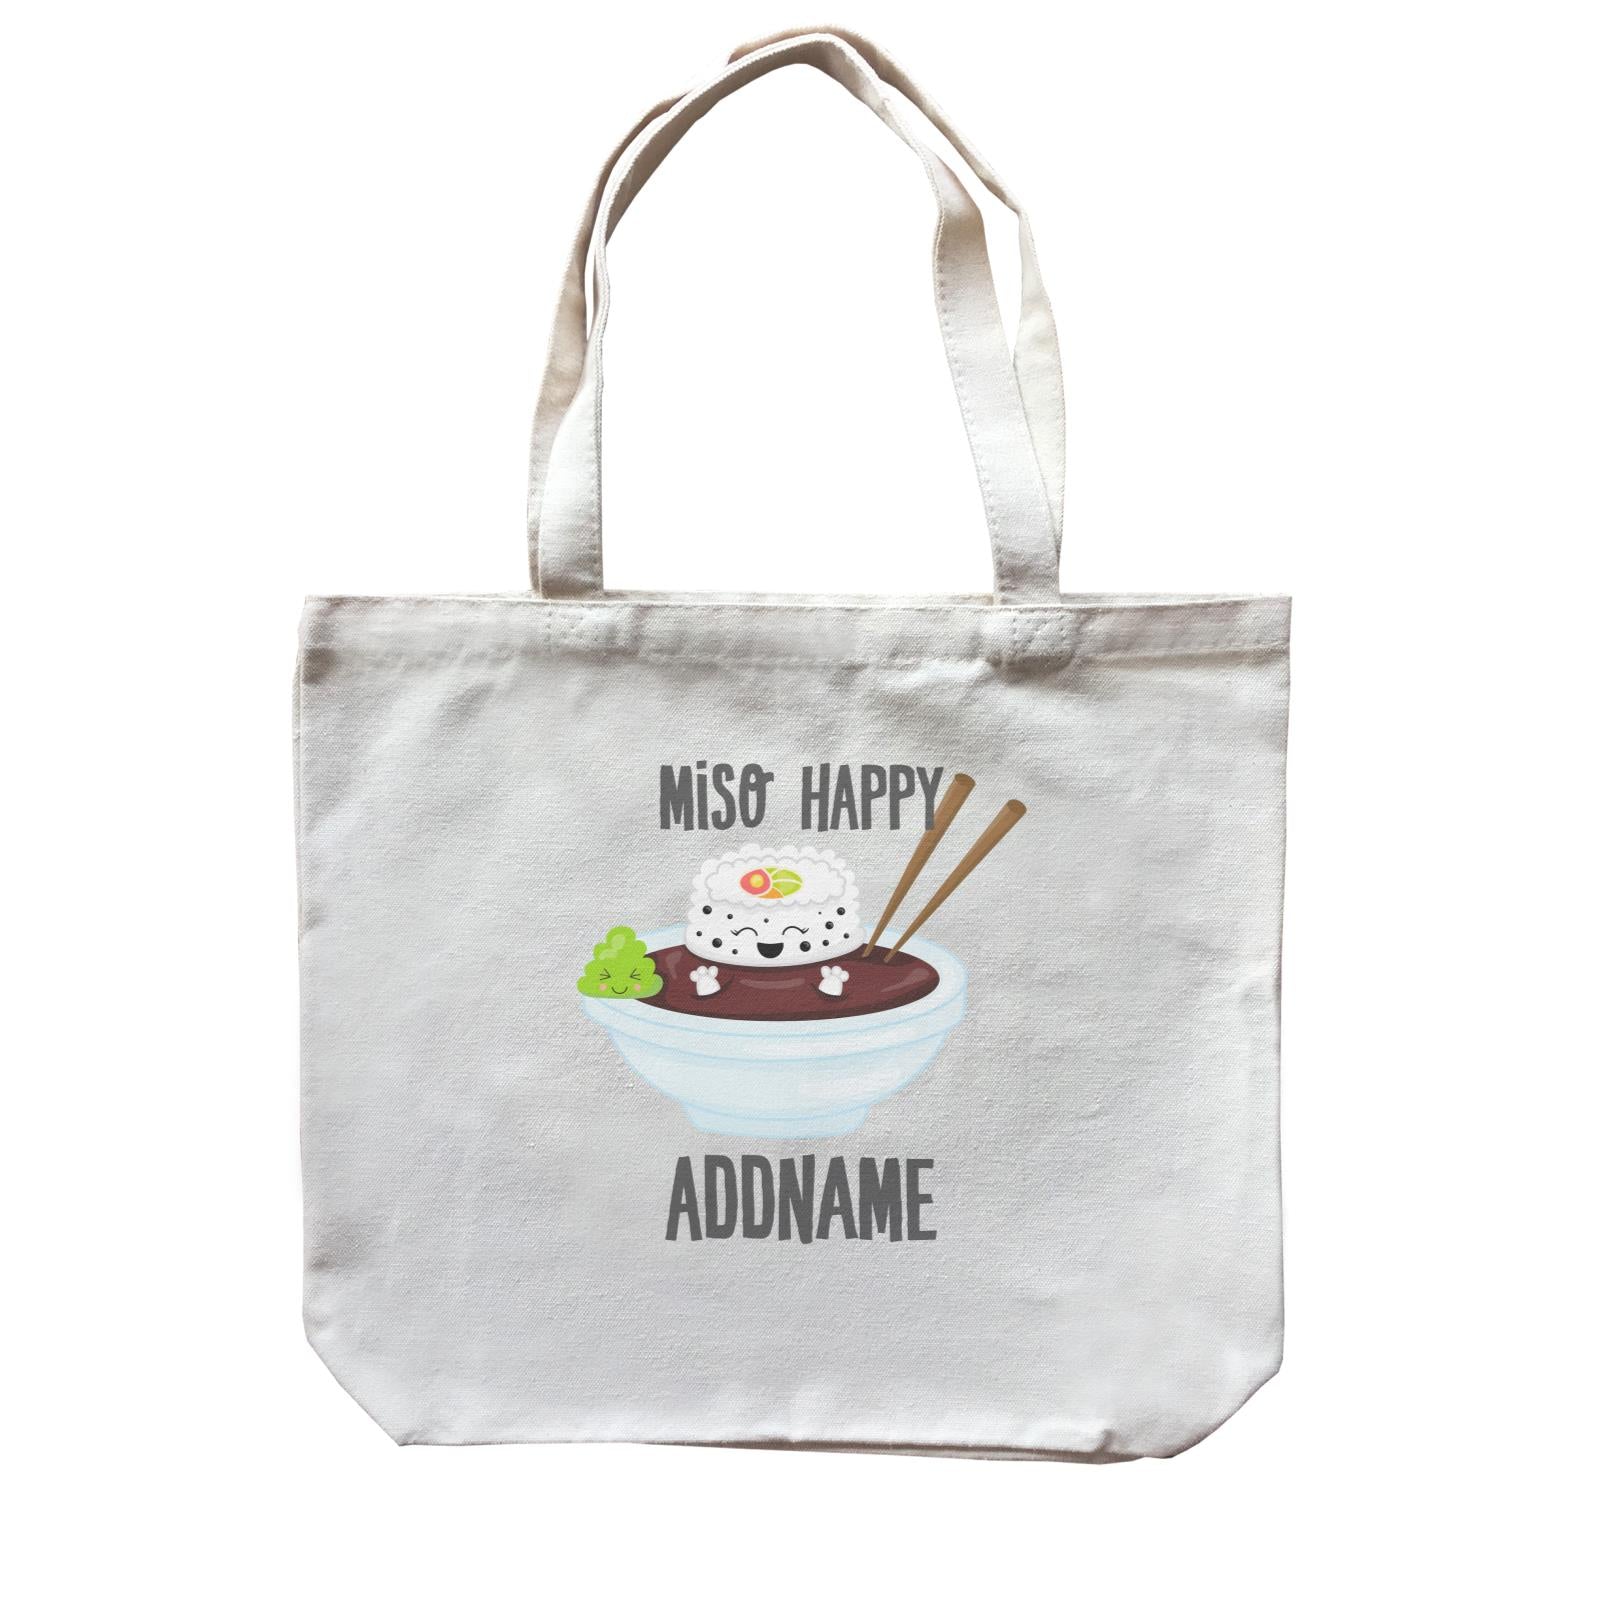 Miso Happy Sushi in Soy Sauce Addname Canvas Bag